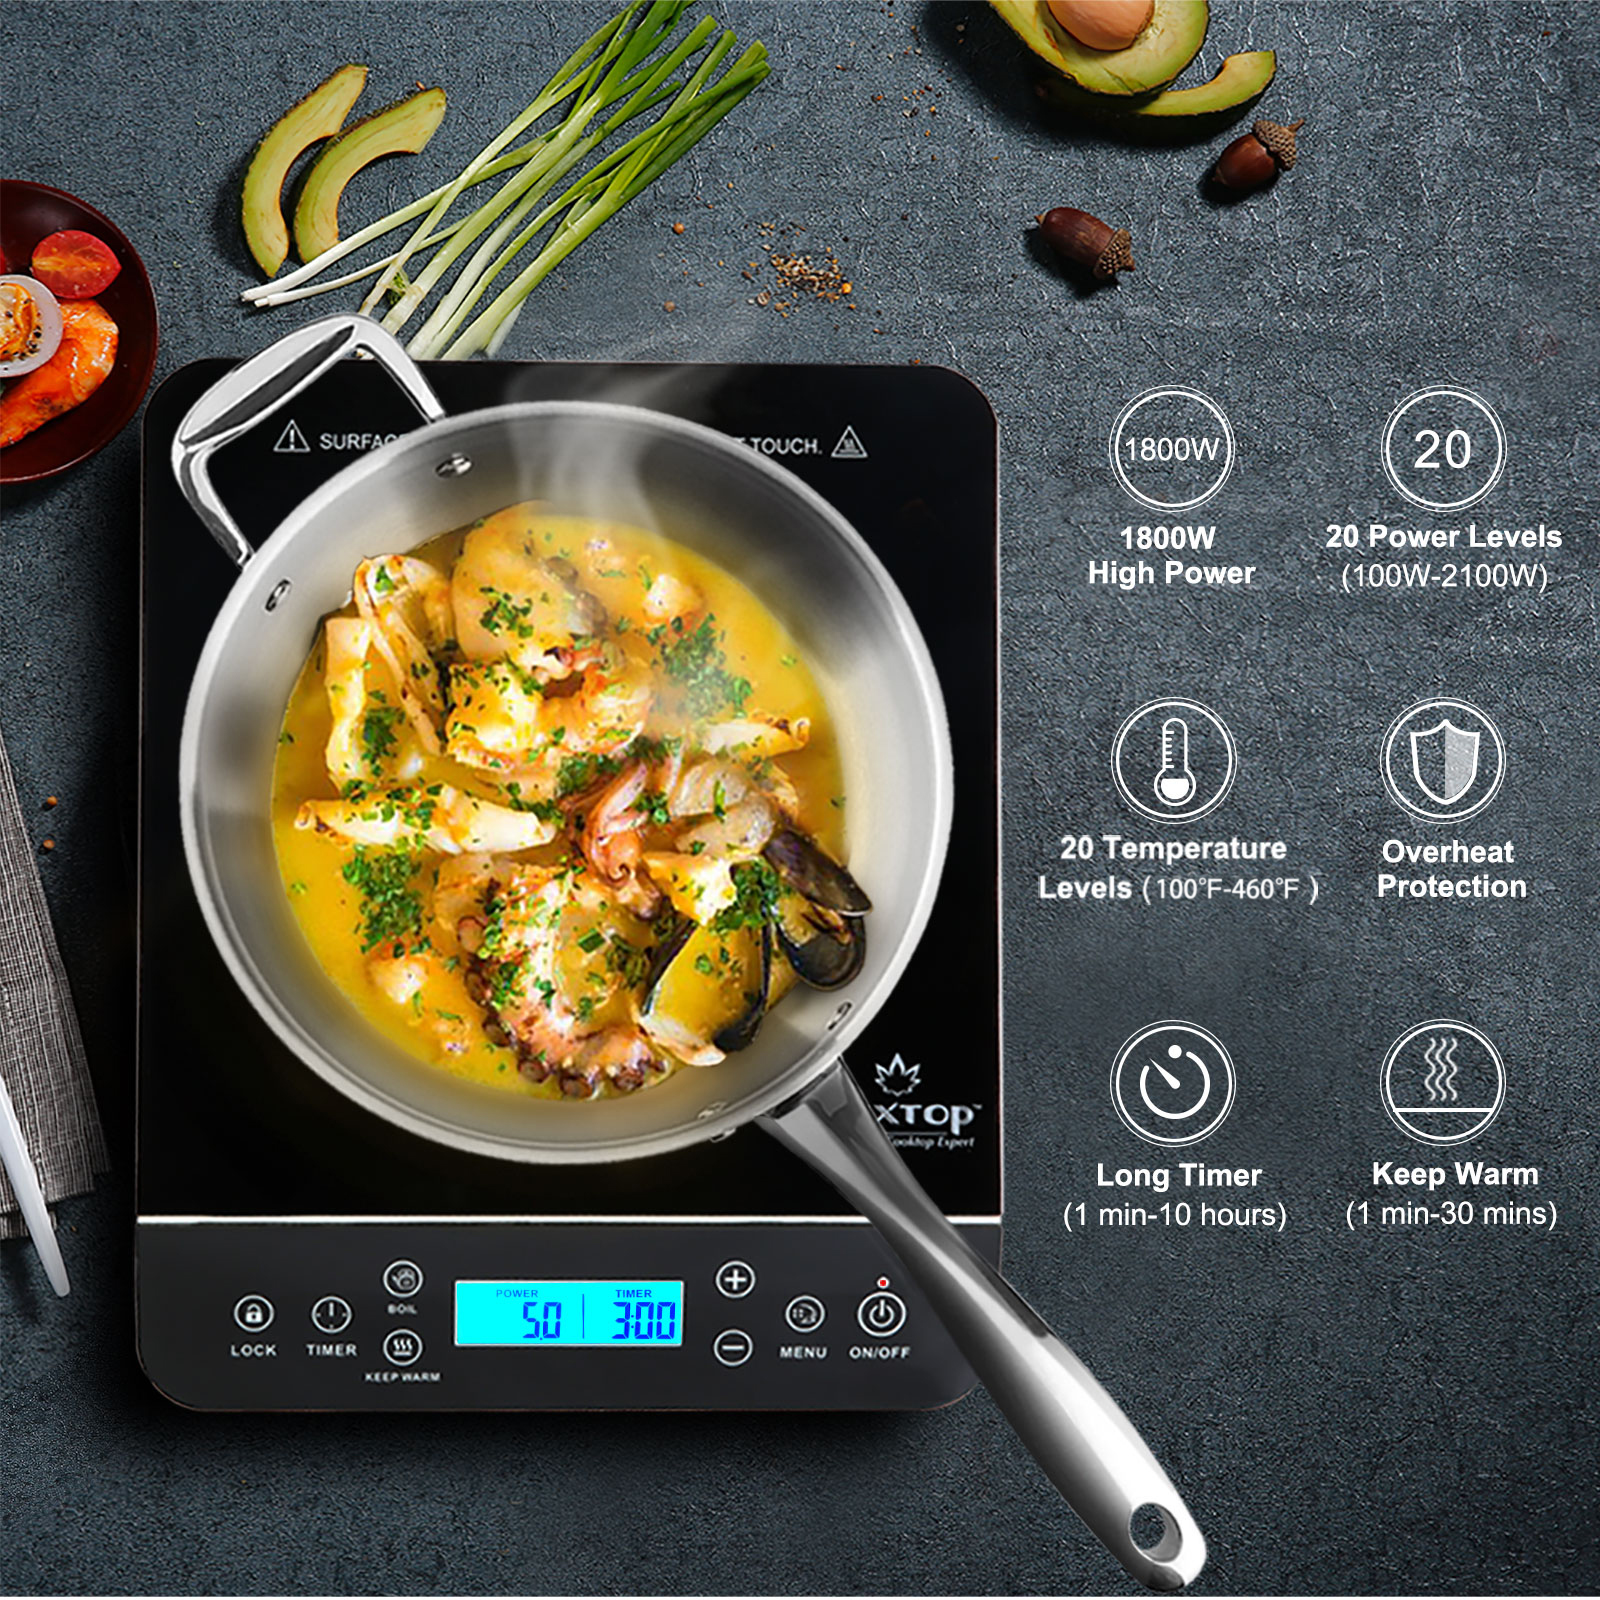 Duxtop Portable Induction Cooktop, Countertop Burner Induction Hot Plate,  Black 9610LS BT-200DZ & Whole-Clad Tri-Ply Stainless Steel Stir-Fry Pan